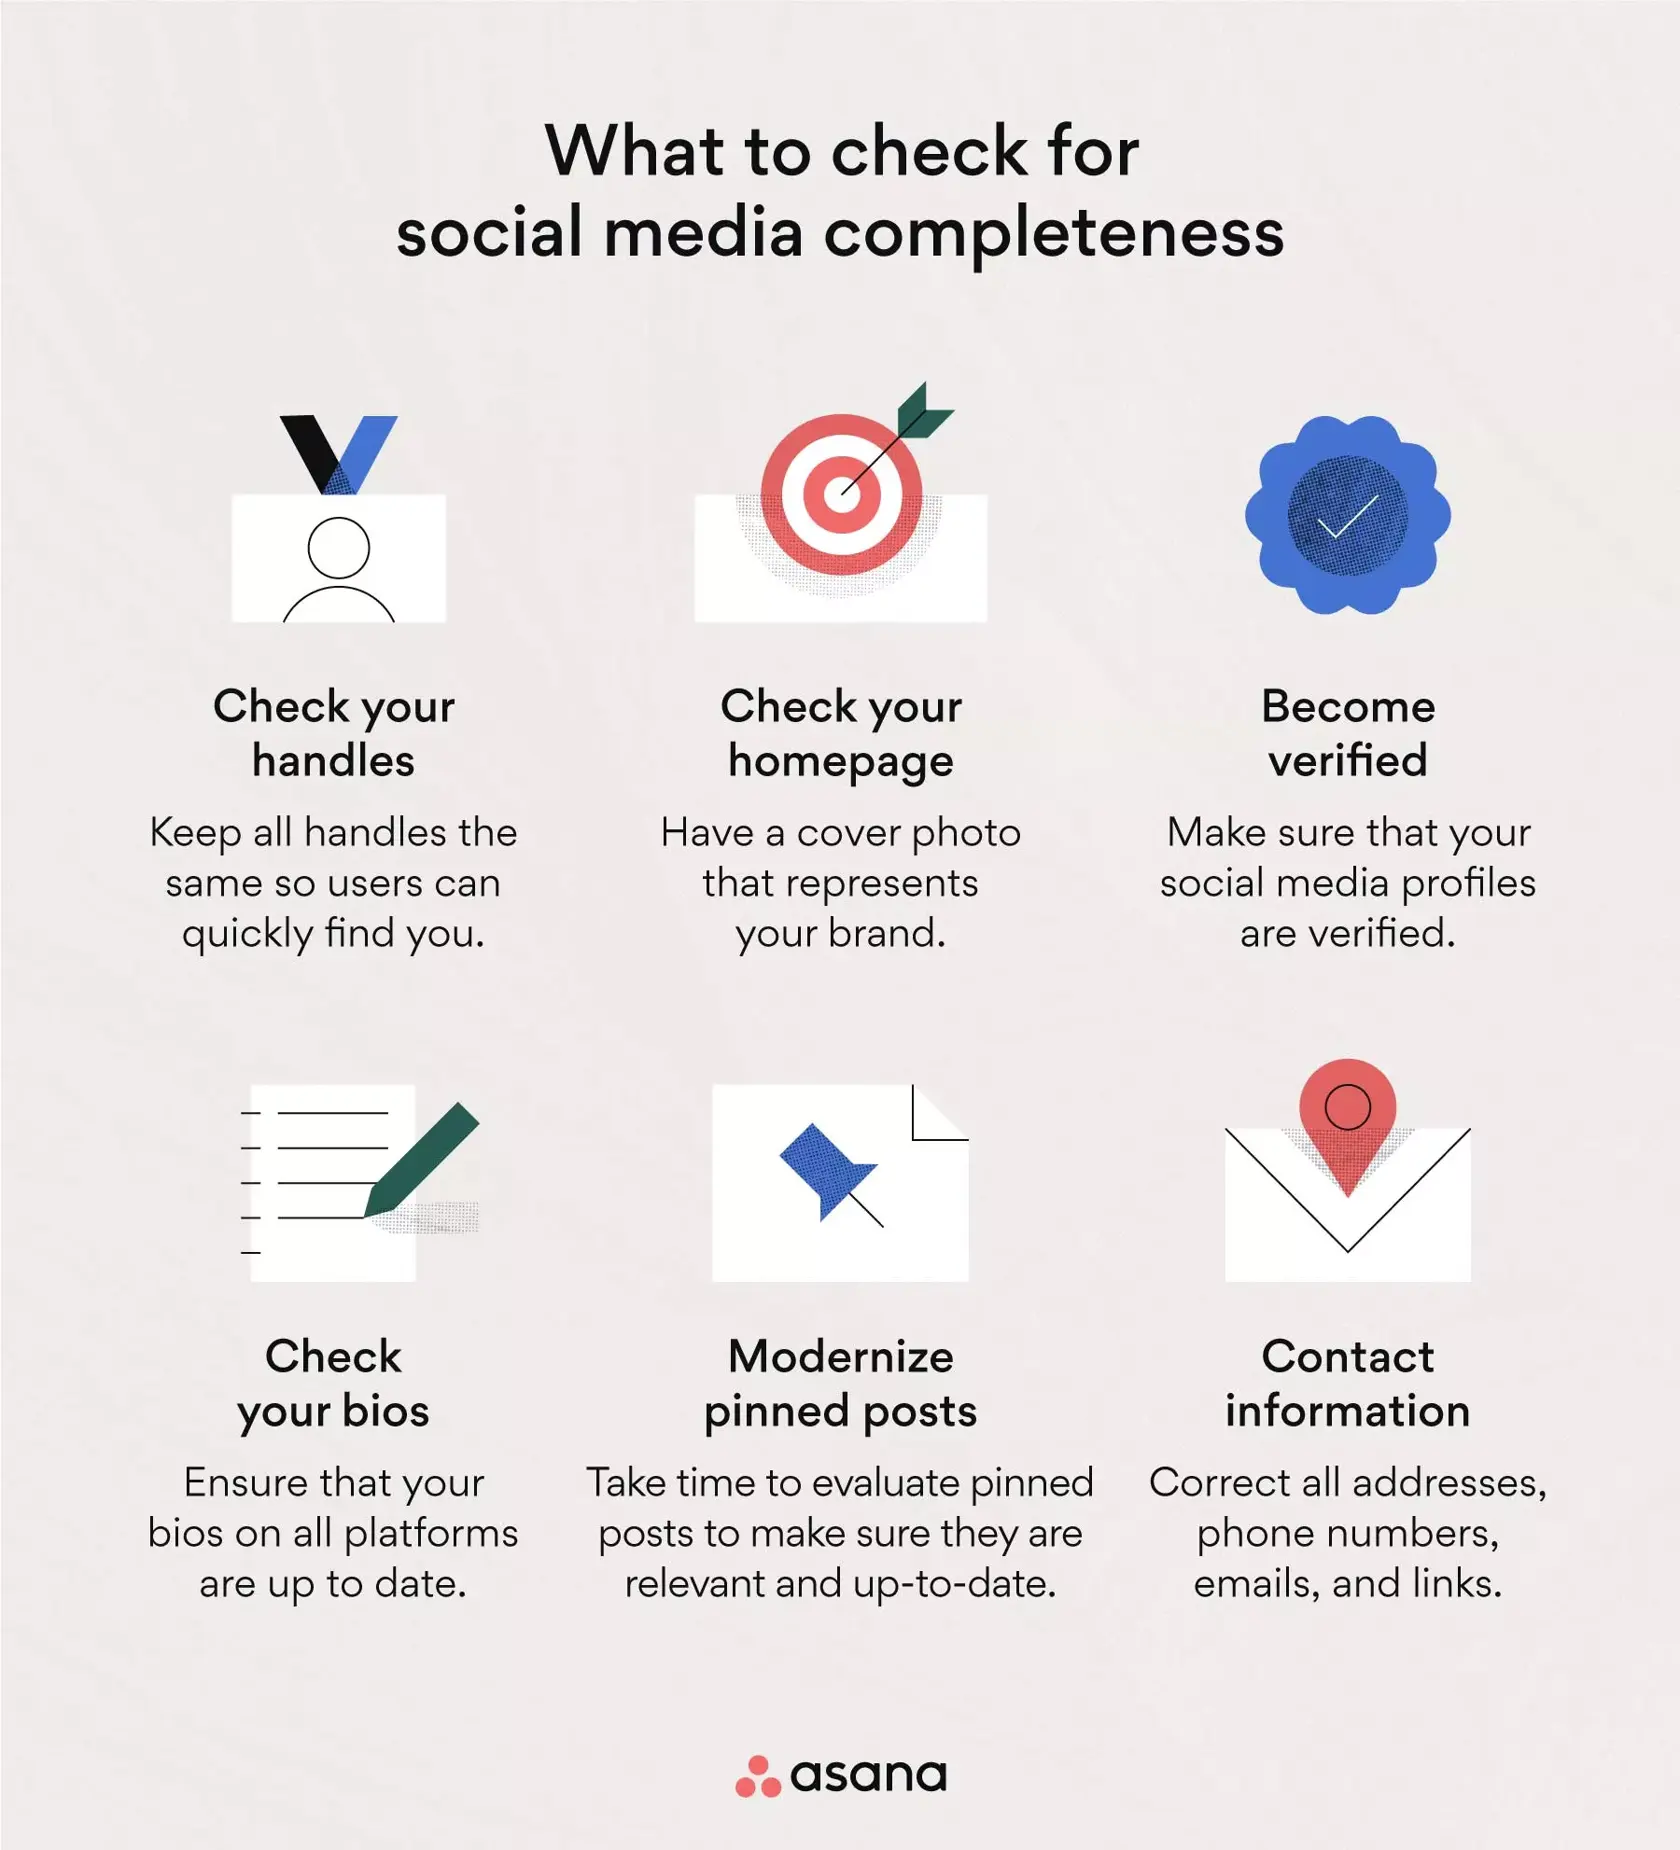 [inline illustration] what to check for social media completeness (infographic)